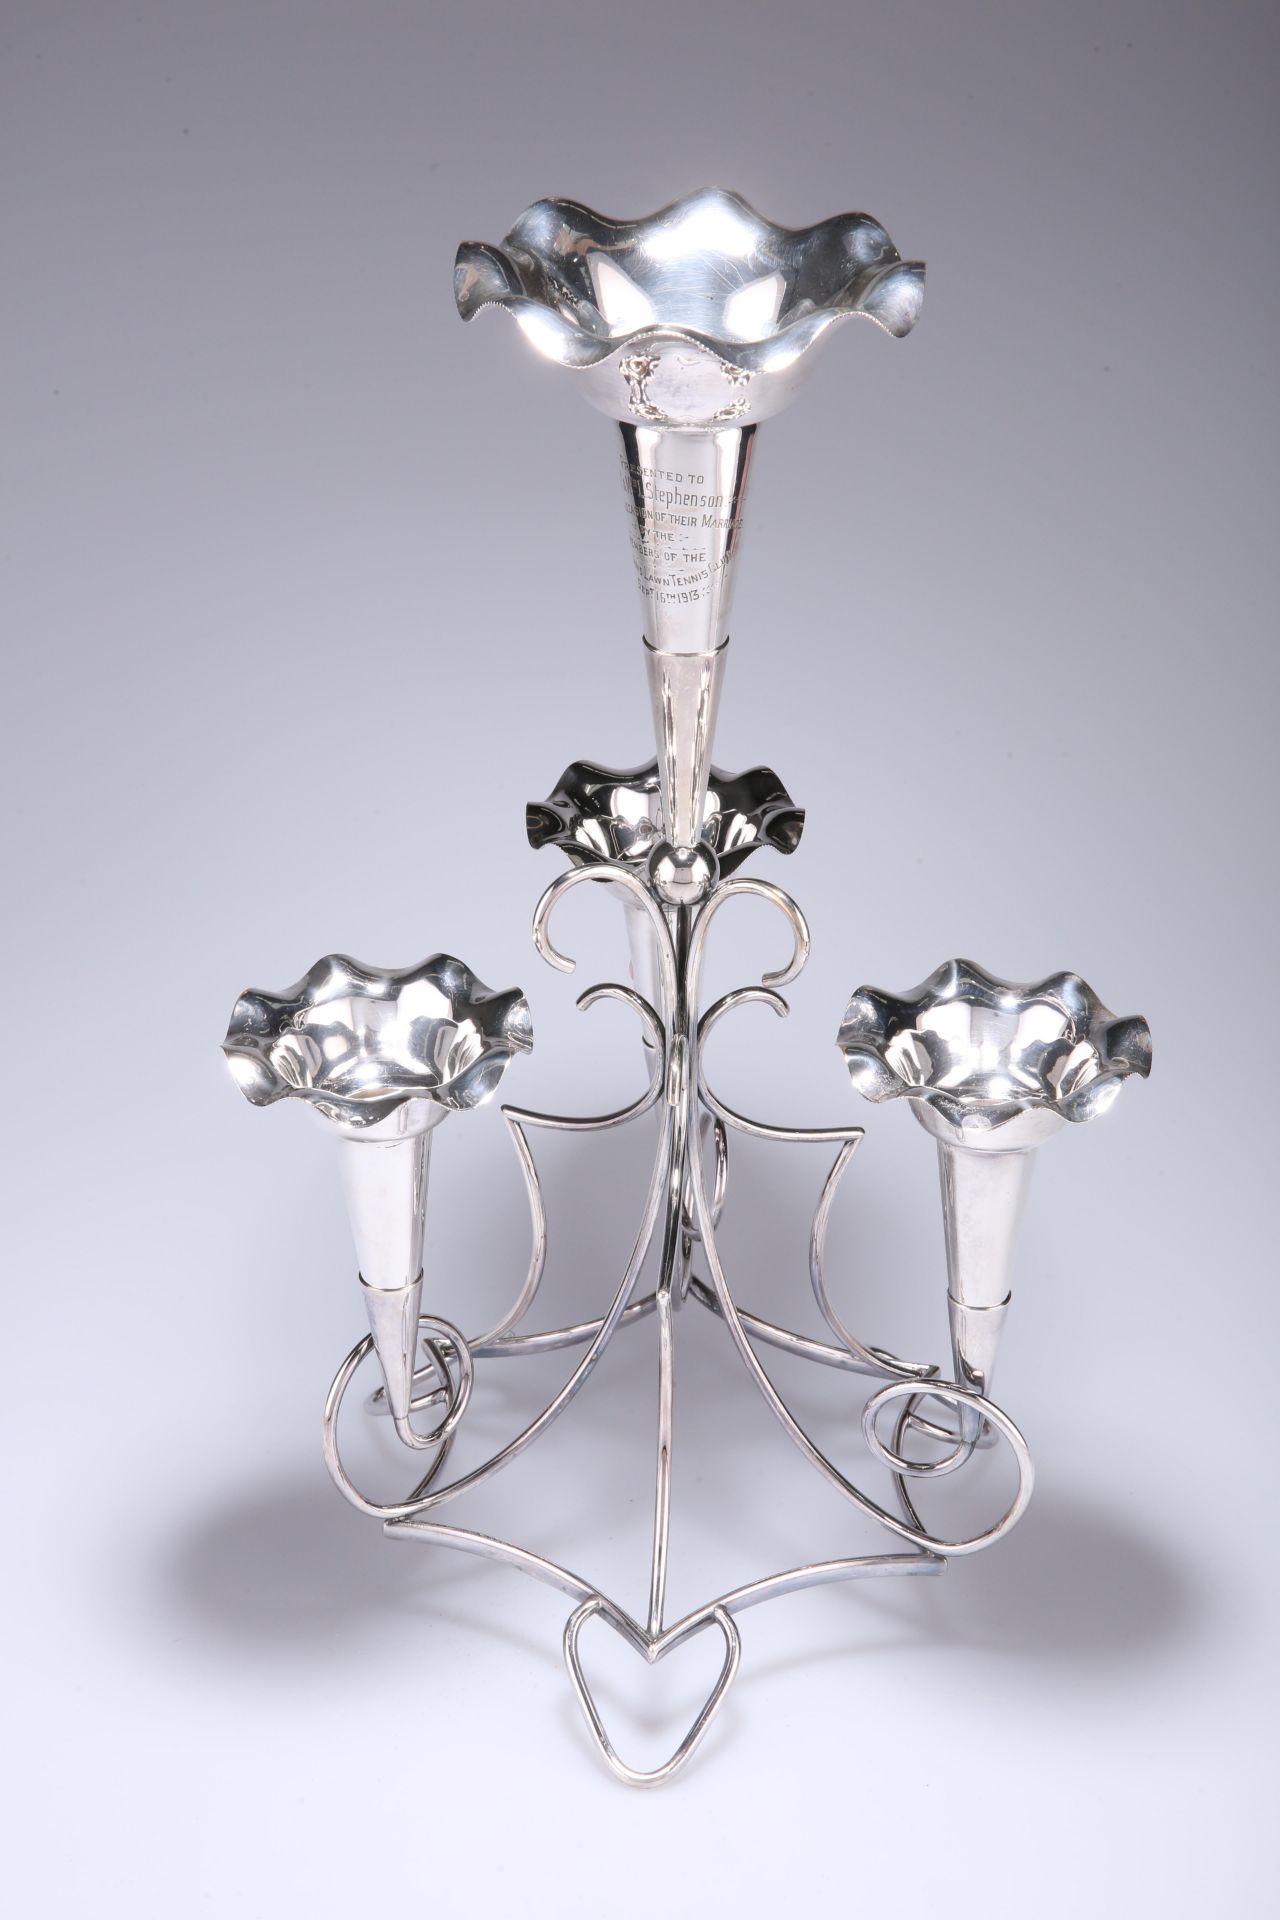 A GEORGE V ELECTROPLATED EPERGNE, LONG CARDIFF, formed of an elaborate scrolling frame with large